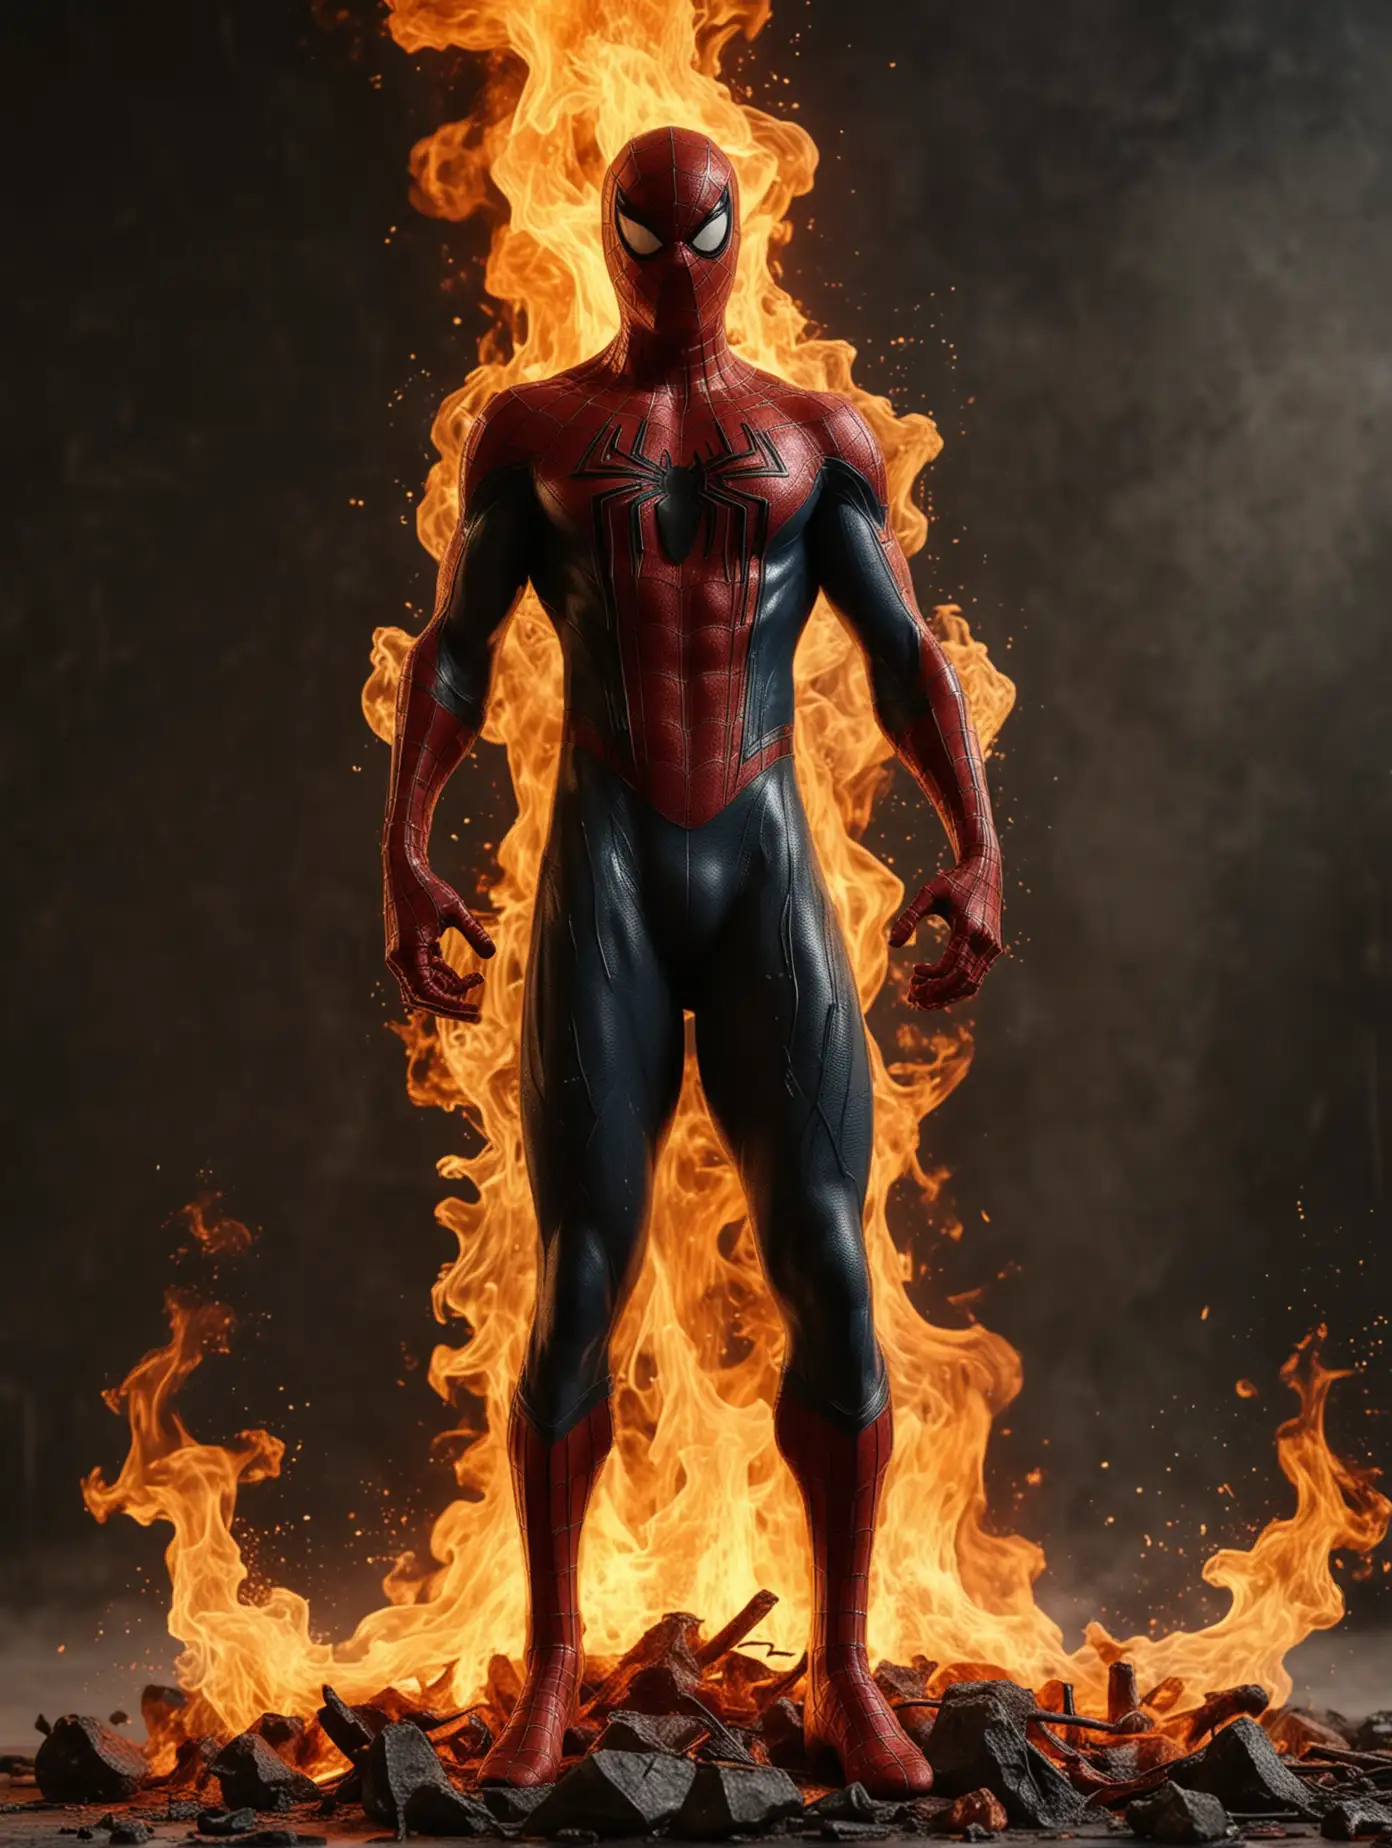 Spiderman Standing in Fire Realistic Hero in Vibrant Flames